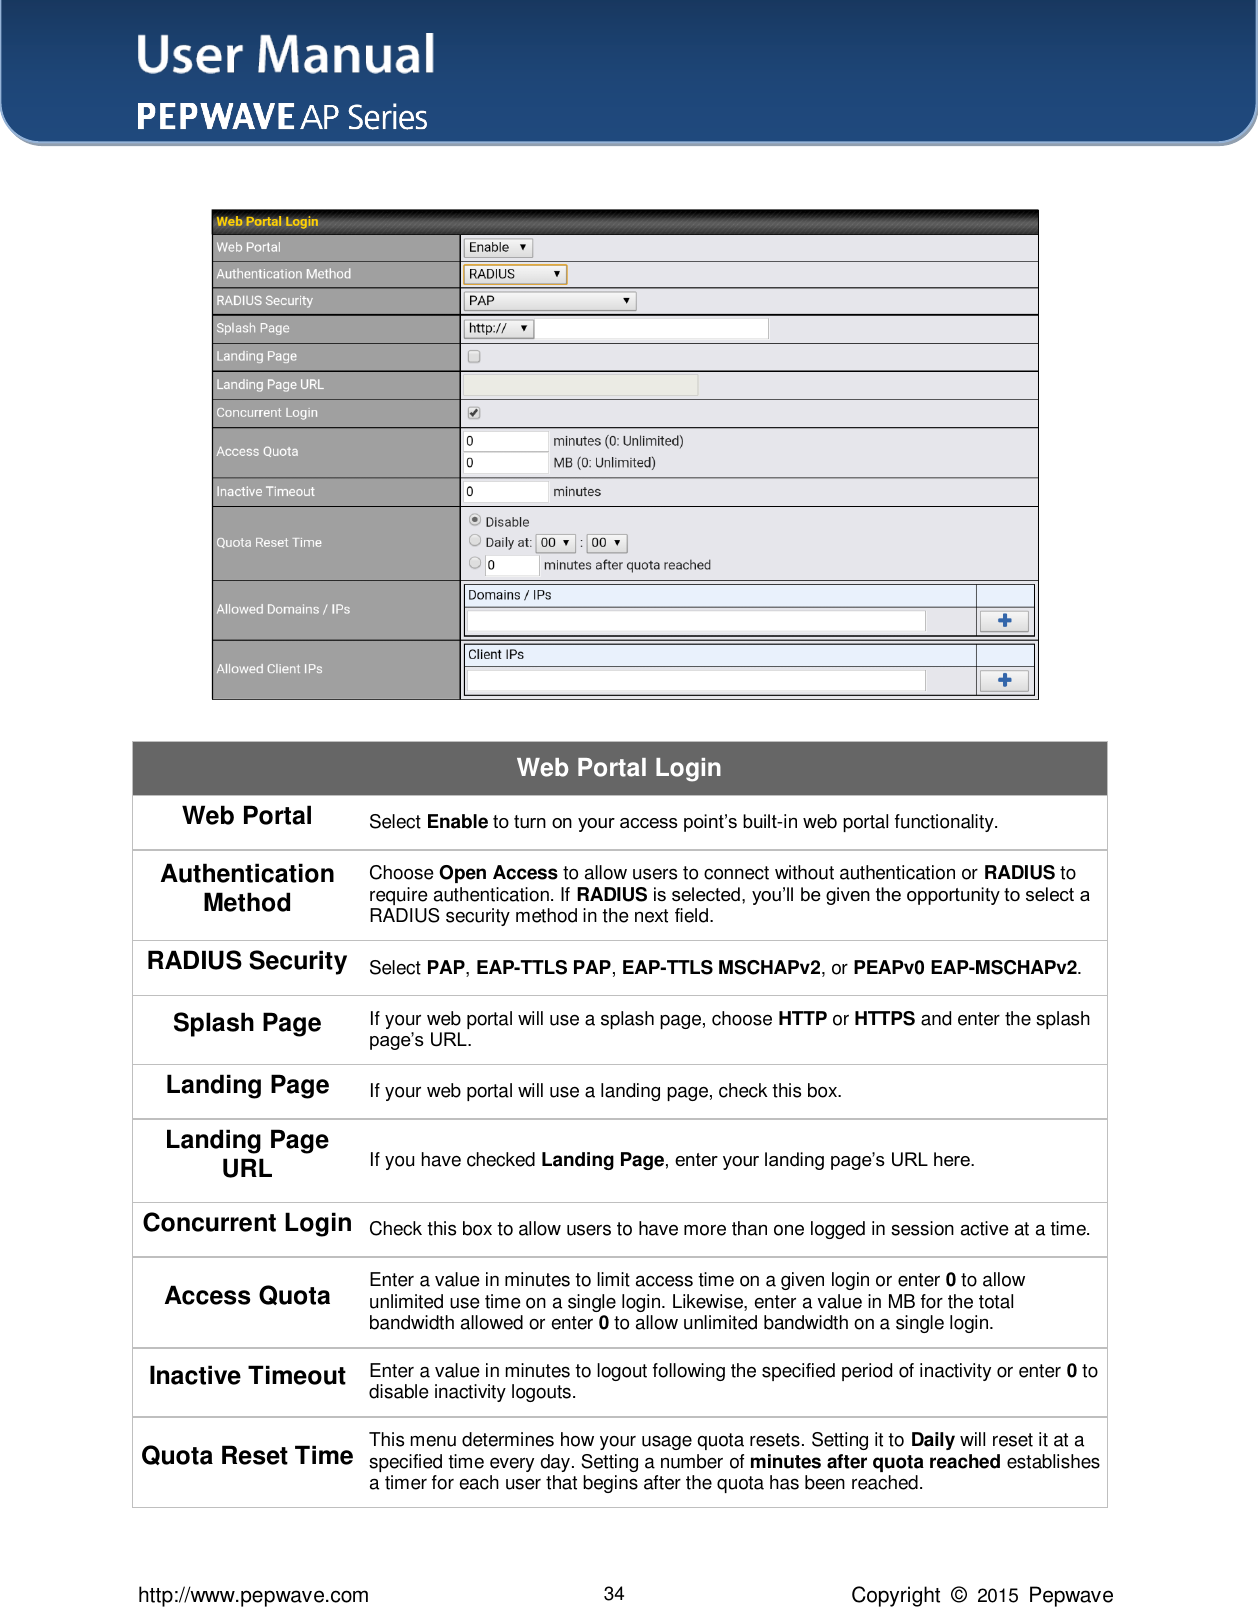 User Manual    http://www.pepwave.com 34 Copyright  ©  2015  Pepwave  Web Portal Login Web Portal Select Enable to turn on your access point’s built-in web portal functionality. Authentication Method Choose Open Access to allow users to connect without authentication or RADIUS to require authentication. If RADIUS is selected, you’ll be given the opportunity to select a RADIUS security method in the next field. RADIUS Security Select PAP, EAP-TTLS PAP, EAP-TTLS MSCHAPv2, or PEAPv0 EAP-MSCHAPv2. Splash Page If your web portal will use a splash page, choose HTTP or HTTPS and enter the splash page’s URL. Landing Page If your web portal will use a landing page, check this box. Landing Page URL If you have checked Landing Page, enter your landing page’s URL here. Concurrent Login Check this box to allow users to have more than one logged in session active at a time. Access Quota Enter a value in minutes to limit access time on a given login or enter 0 to allow unlimited use time on a single login. Likewise, enter a value in MB for the total bandwidth allowed or enter 0 to allow unlimited bandwidth on a single login. Inactive Timeout Enter a value in minutes to logout following the specified period of inactivity or enter 0 to disable inactivity logouts. Quota Reset Time This menu determines how your usage quota resets. Setting it to Daily will reset it at a specified time every day. Setting a number of minutes after quota reached establishes a timer for each user that begins after the quota has been reached. 